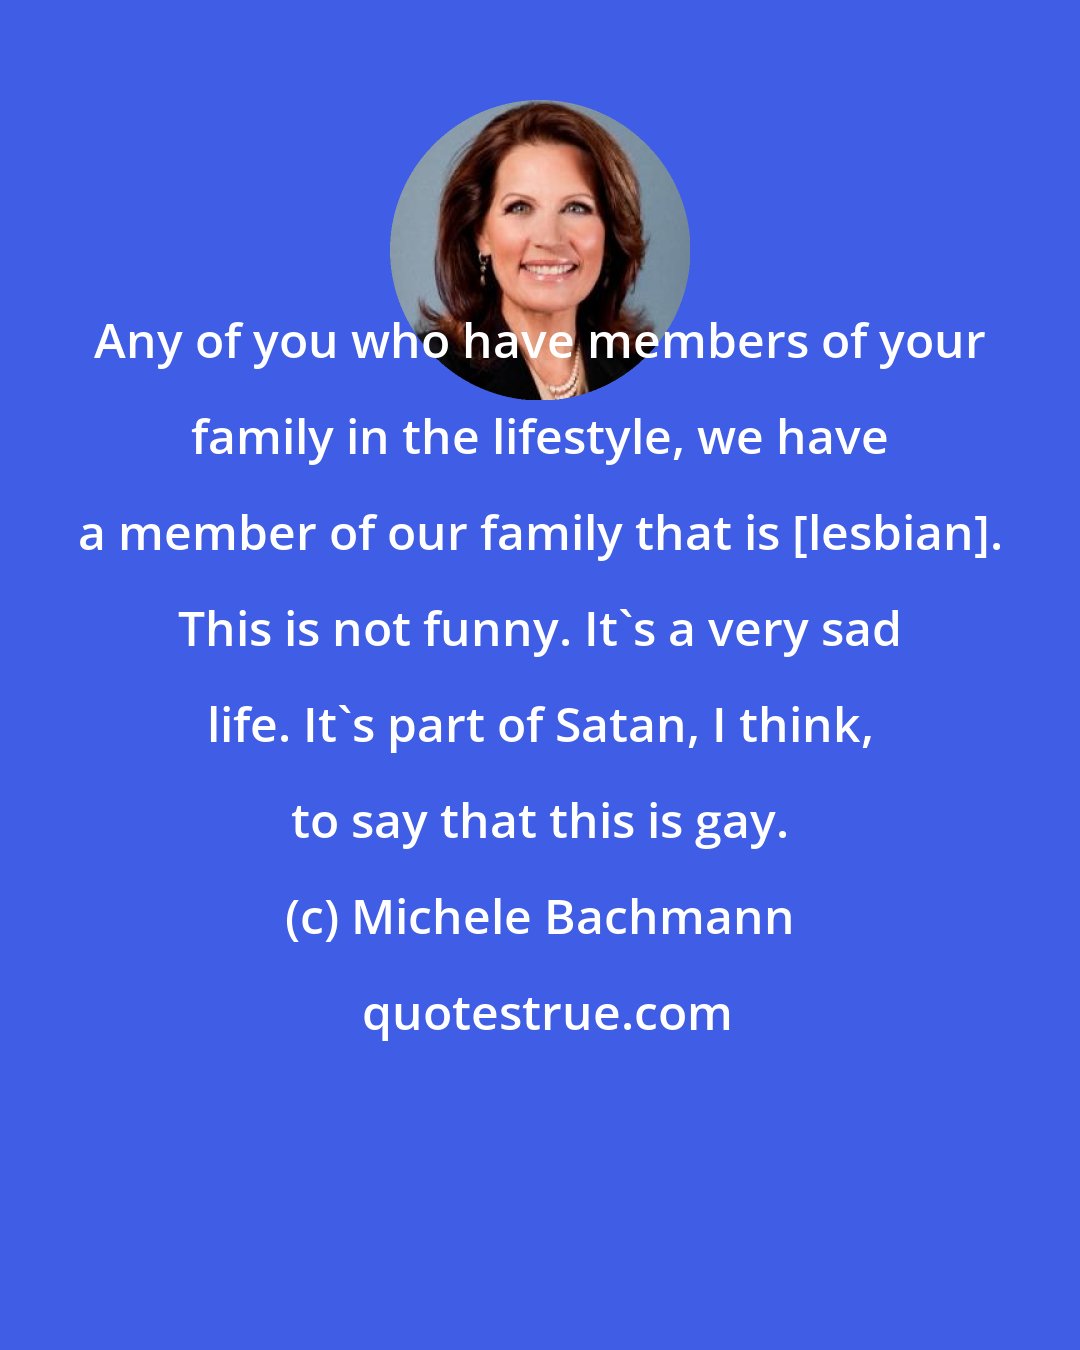 Michele Bachmann: Any of you who have members of your family in the lifestyle, we have a member of our family that is [lesbian]. This is not funny. It's a very sad life. It's part of Satan, I think, to say that this is gay.